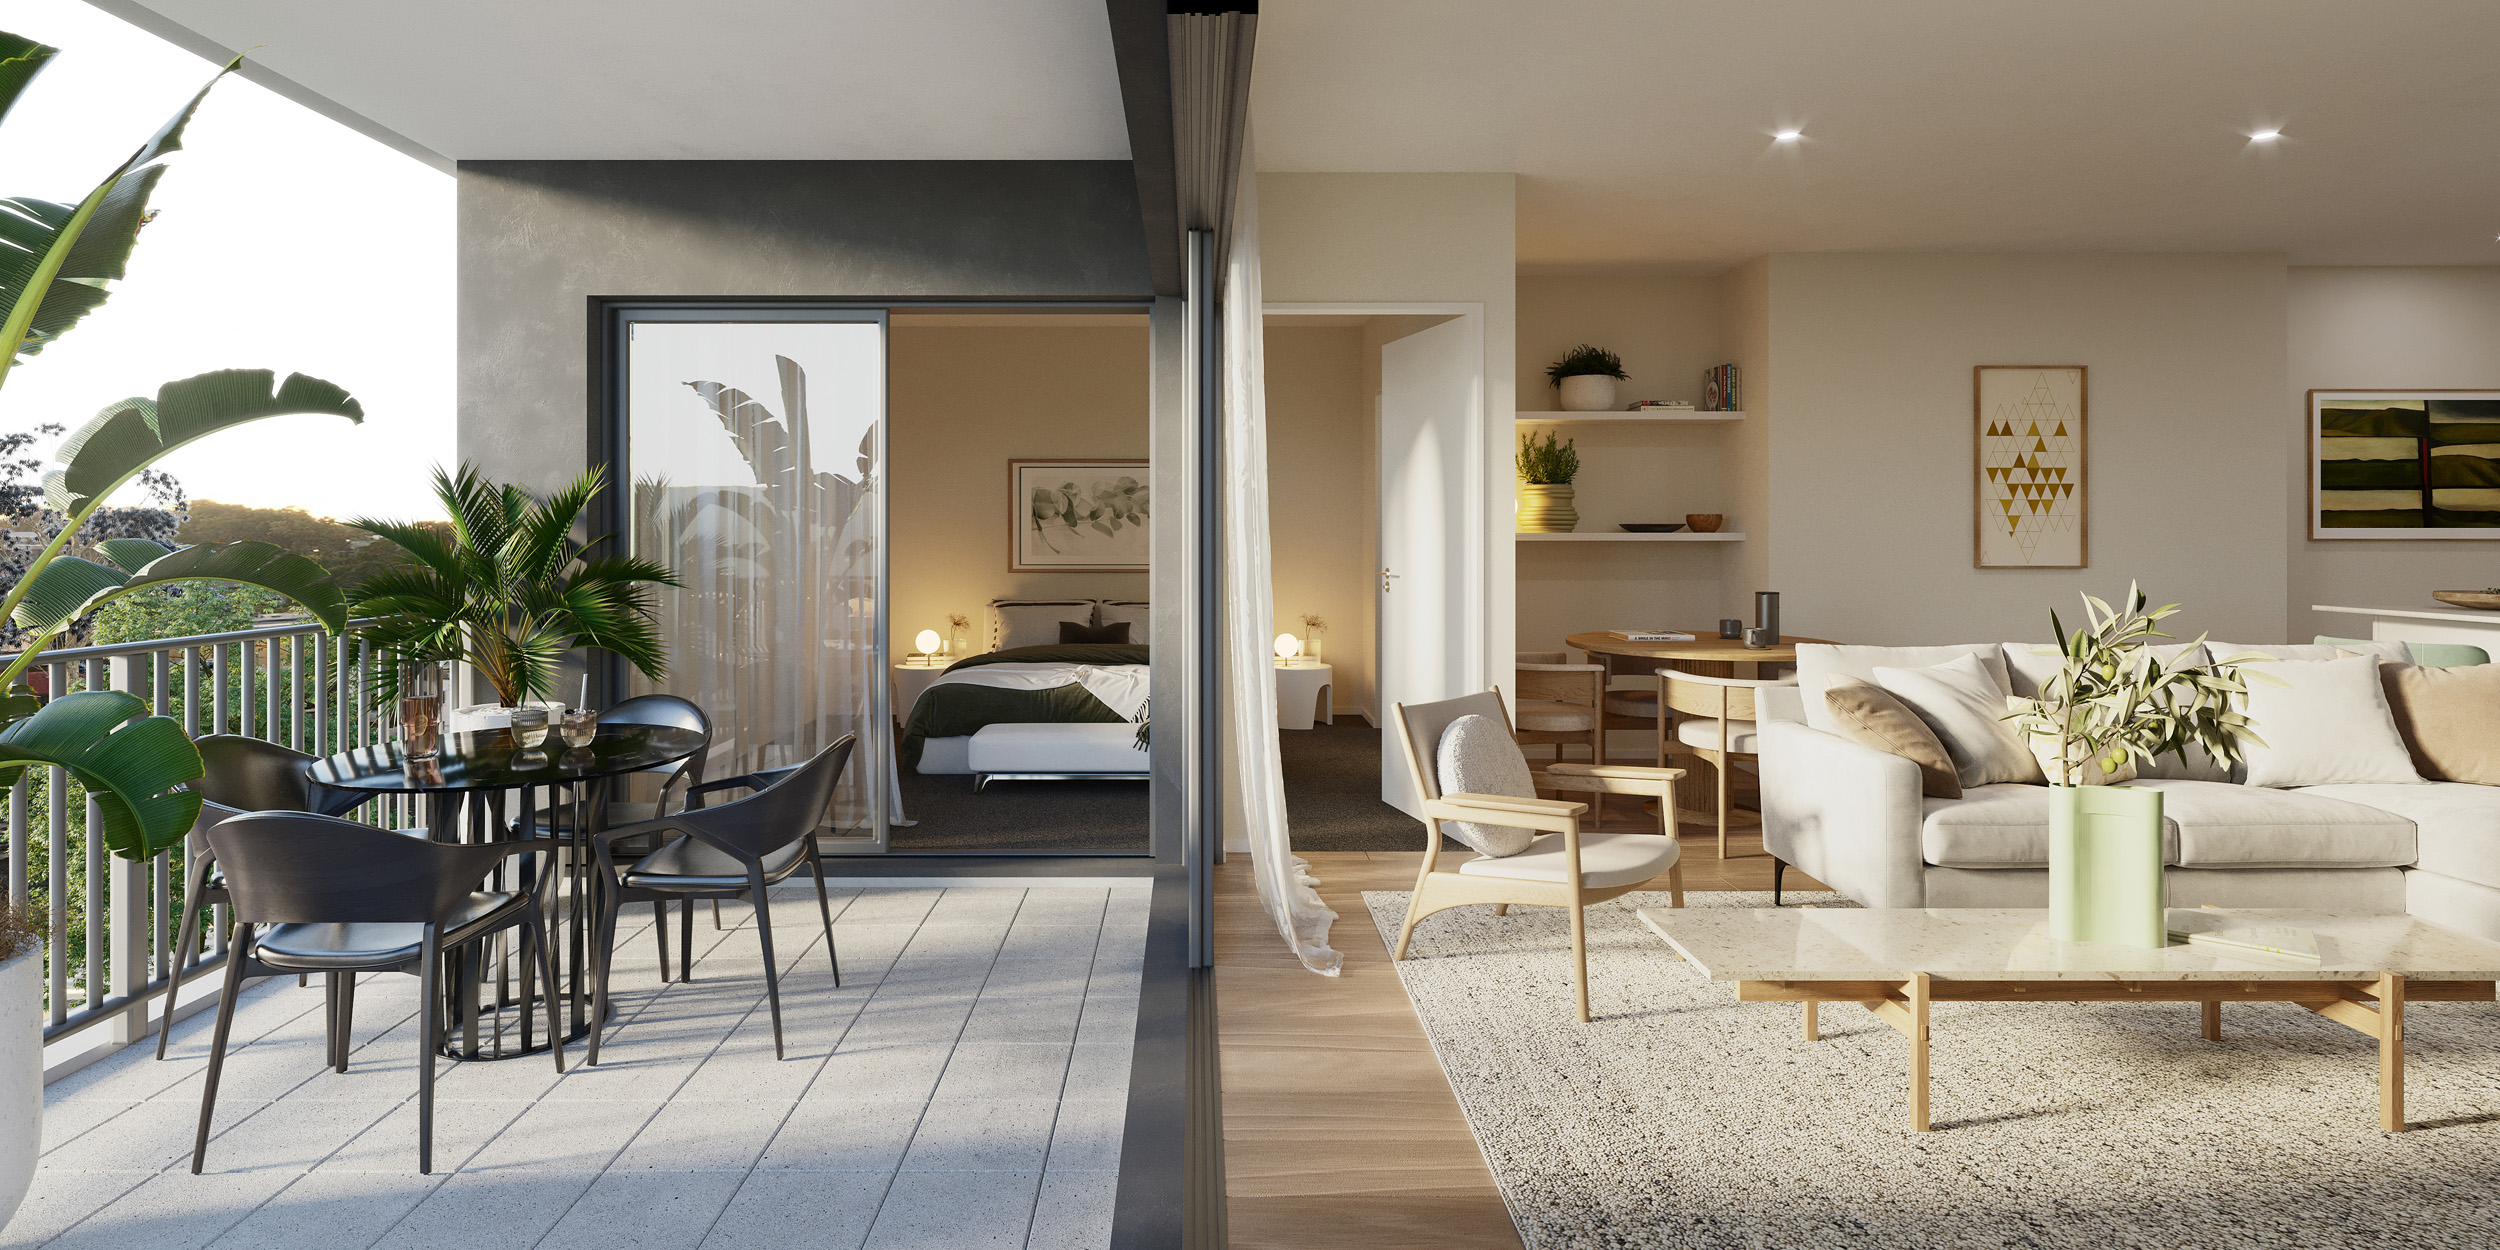 Shillito Apartments Lounge Section 3D Render